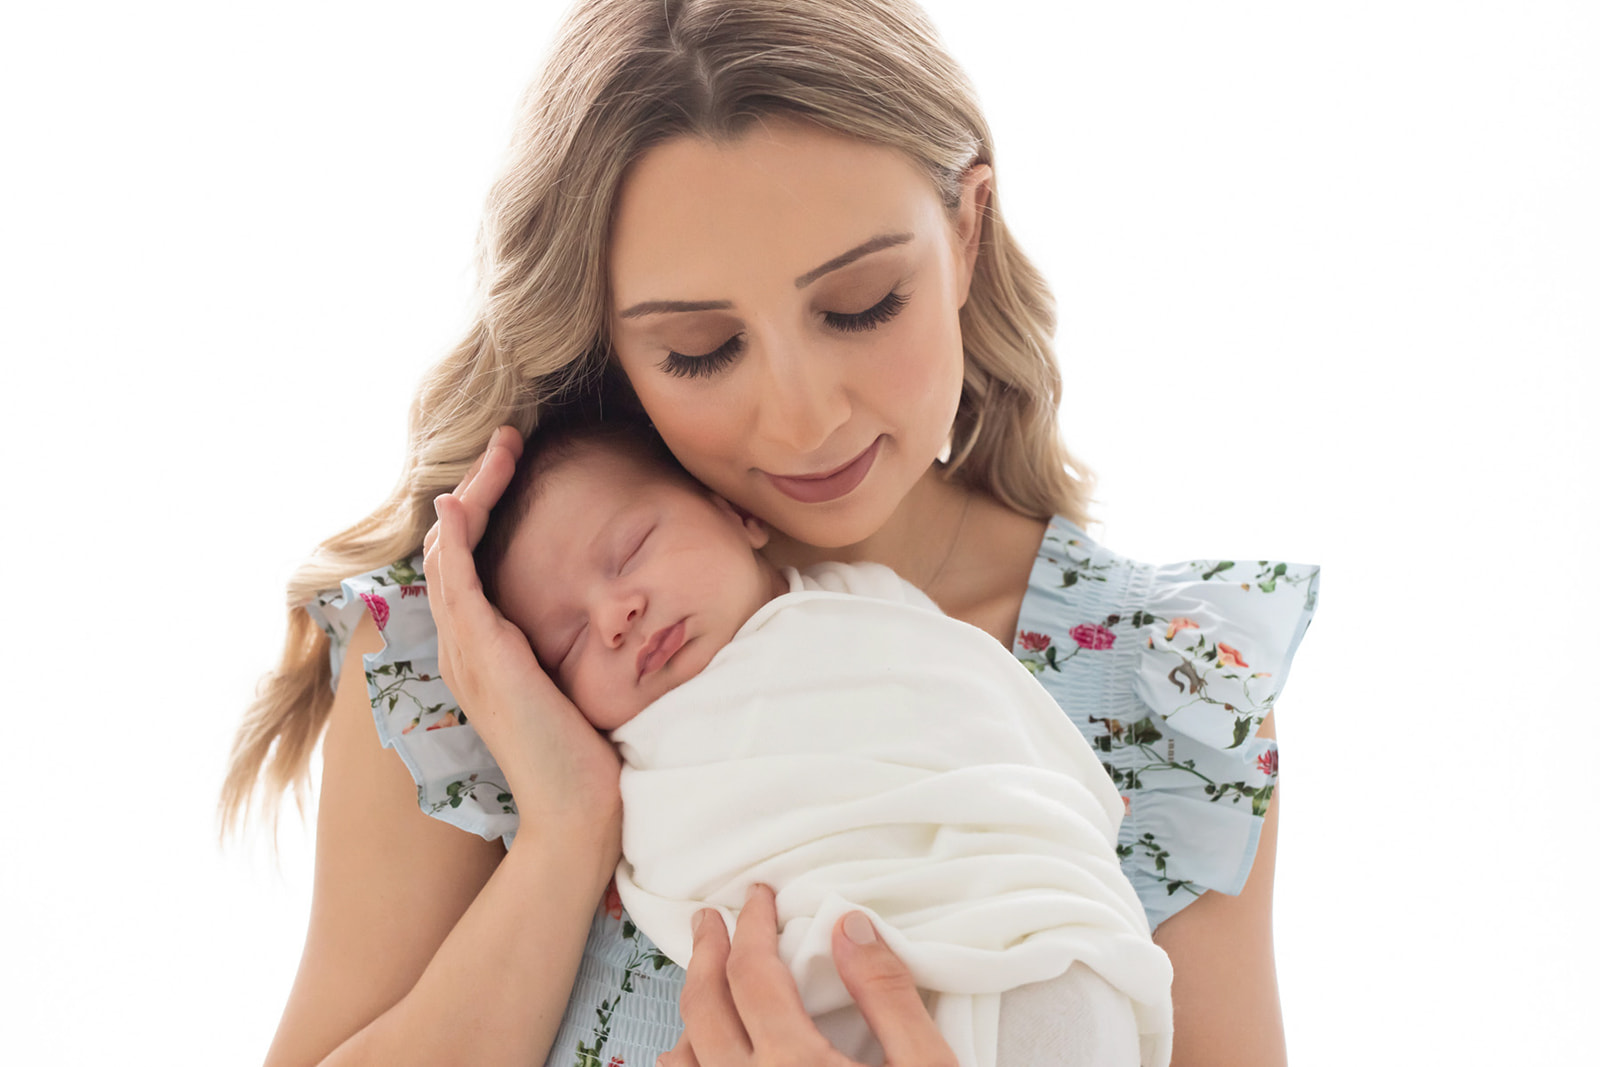 A new mom cradles her sleeping newborn baby against her chest while wearing a blue dress